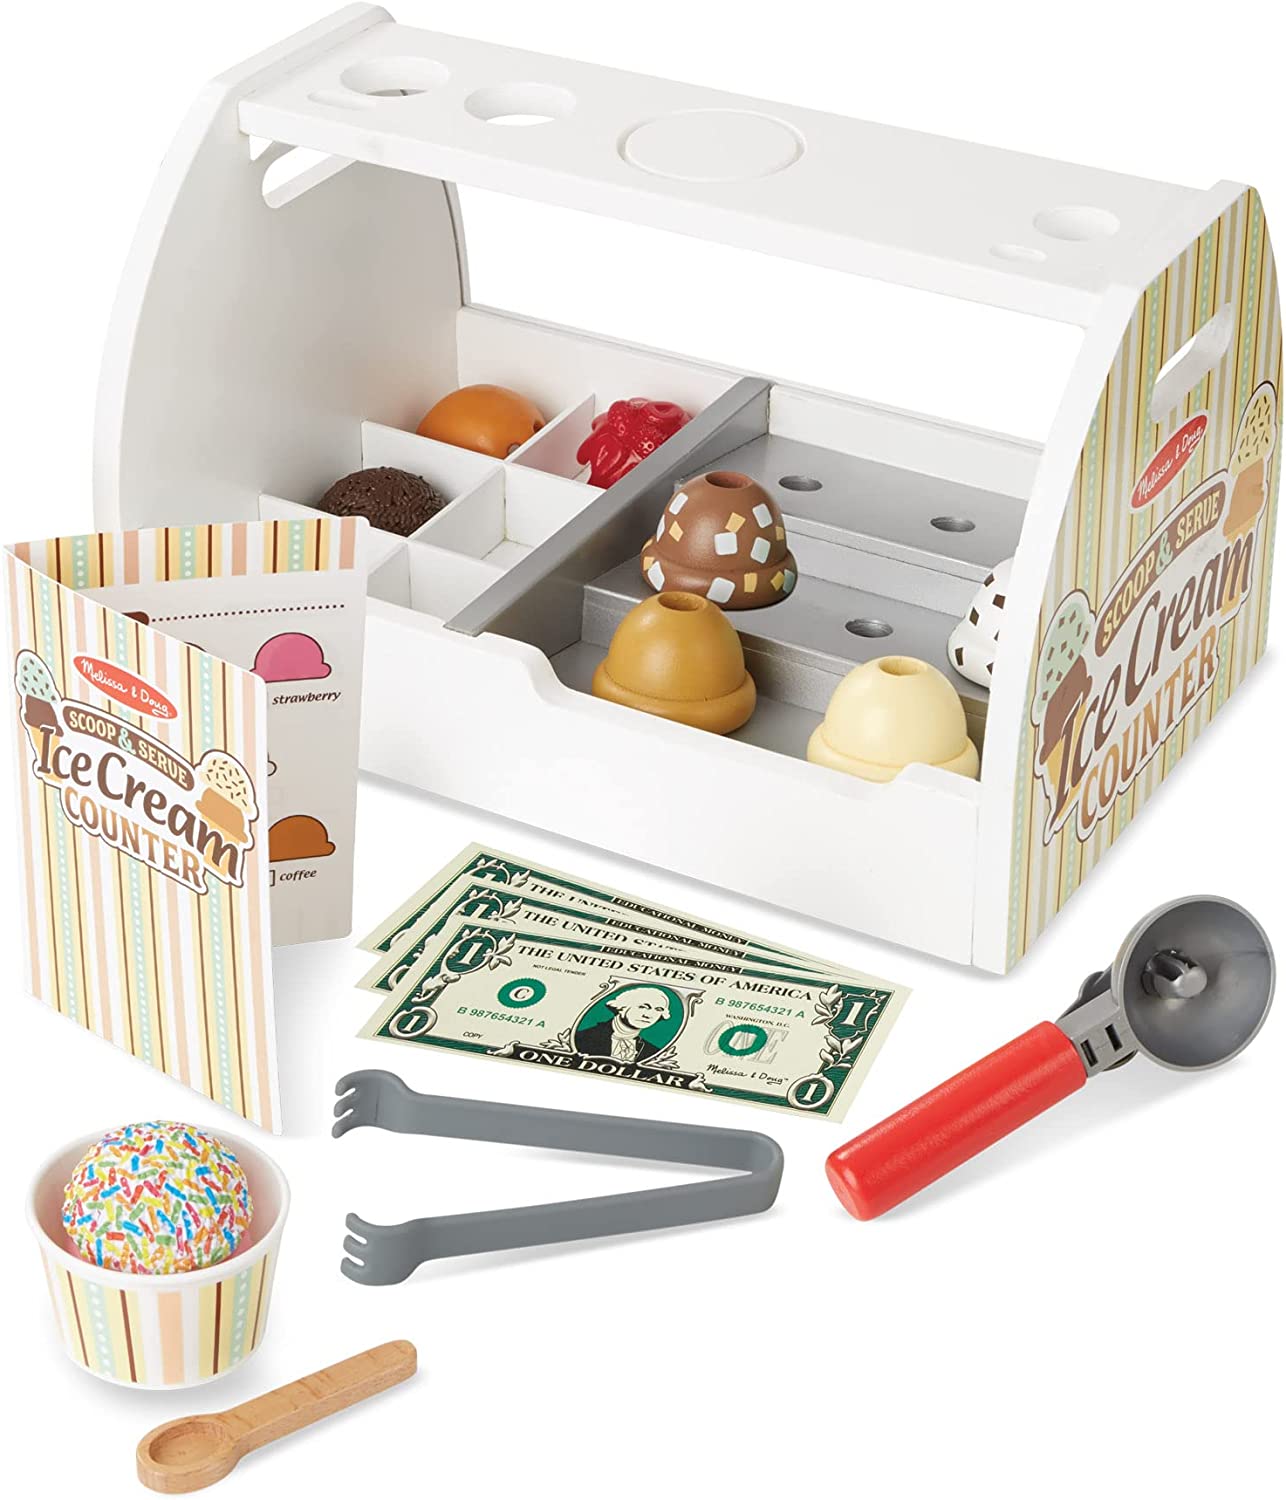 28-Piece Melissa & Doug Wooden Scoop and Serve Ice Cream Counter $20.39 + Free Shipping w/ Amazon Prime or Orders $25+